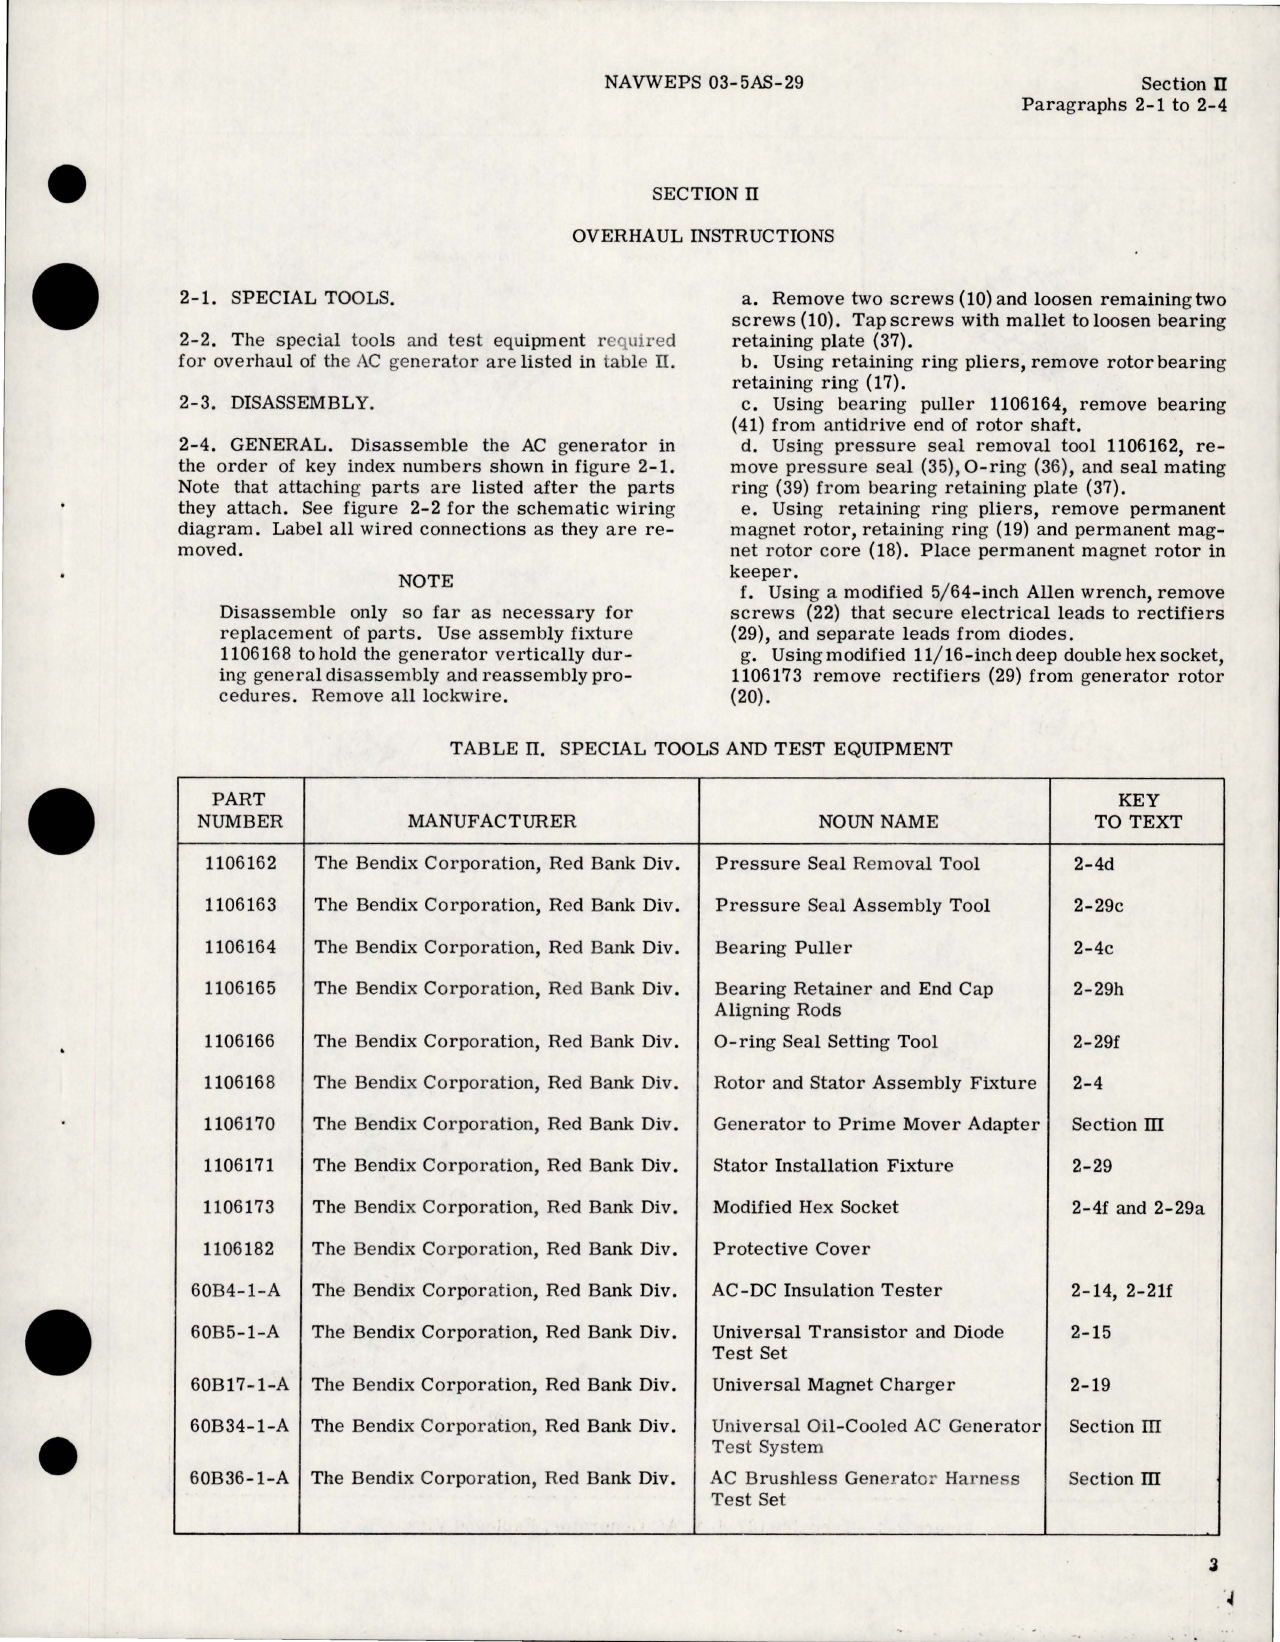 Sample page 7 from AirCorps Library document: Overhaul Instructions for AC Generator - Type 28B187-4-A, 28B187-6-A 